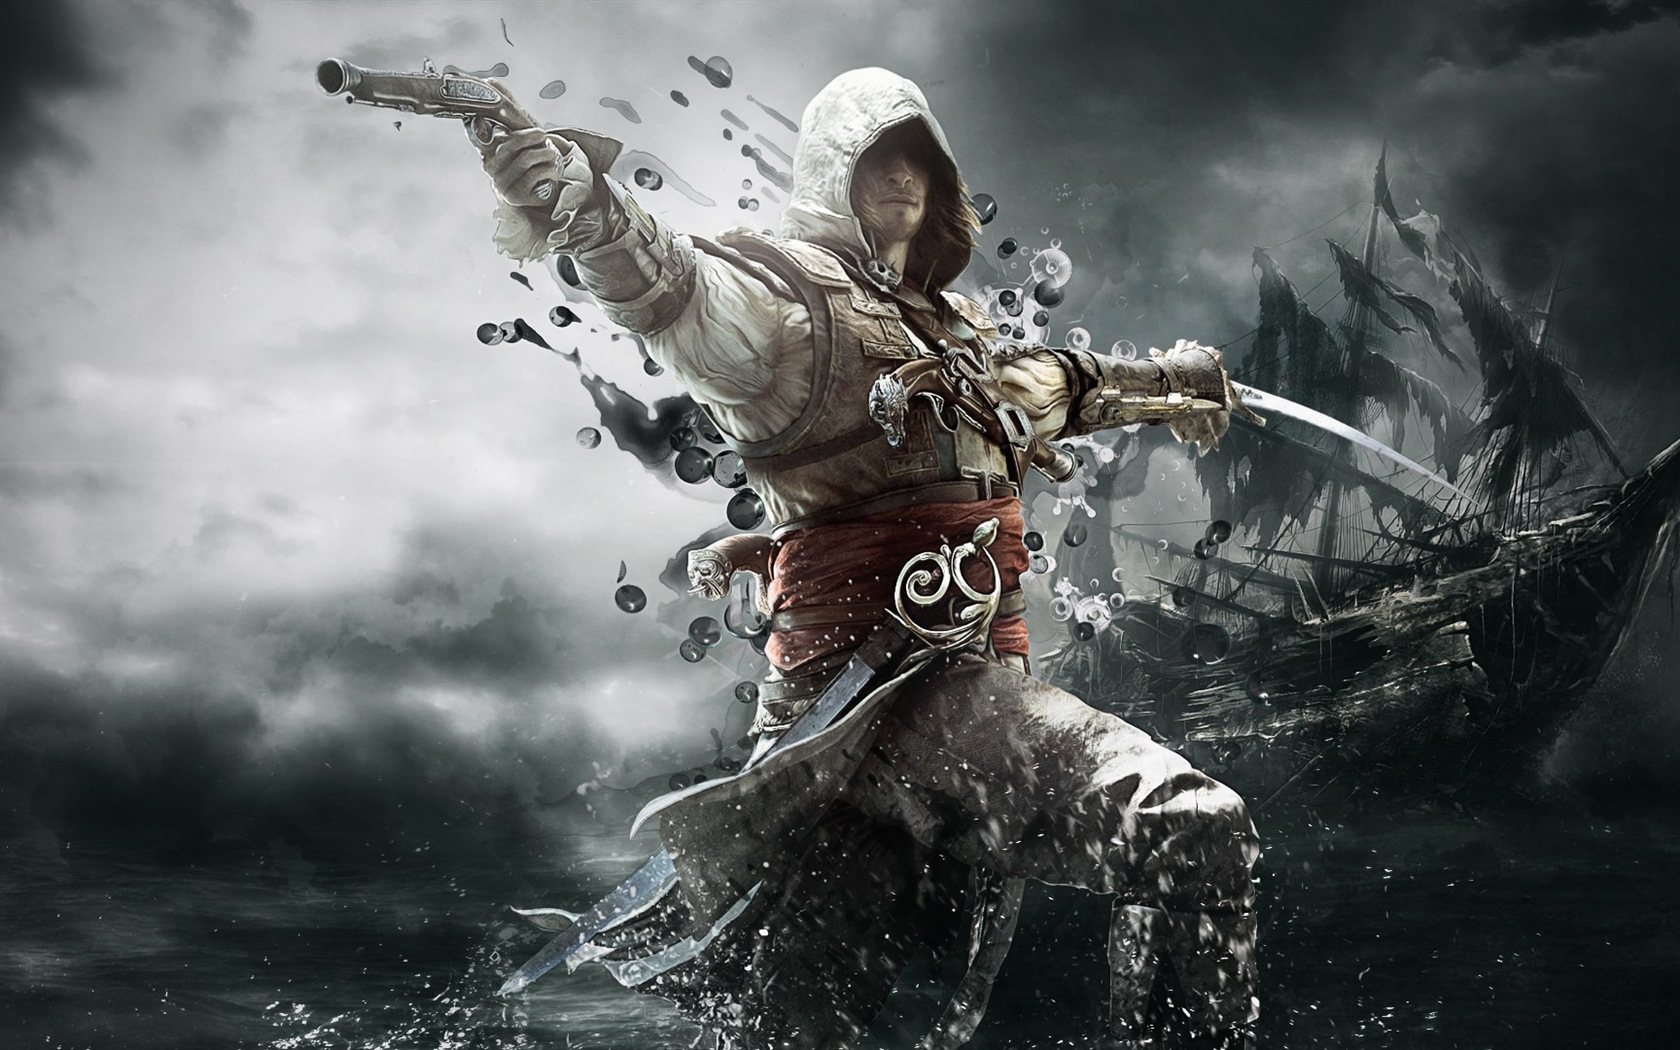 Creed IV Assassin: Black Flag HD wallpapers #8 - 1680x1050